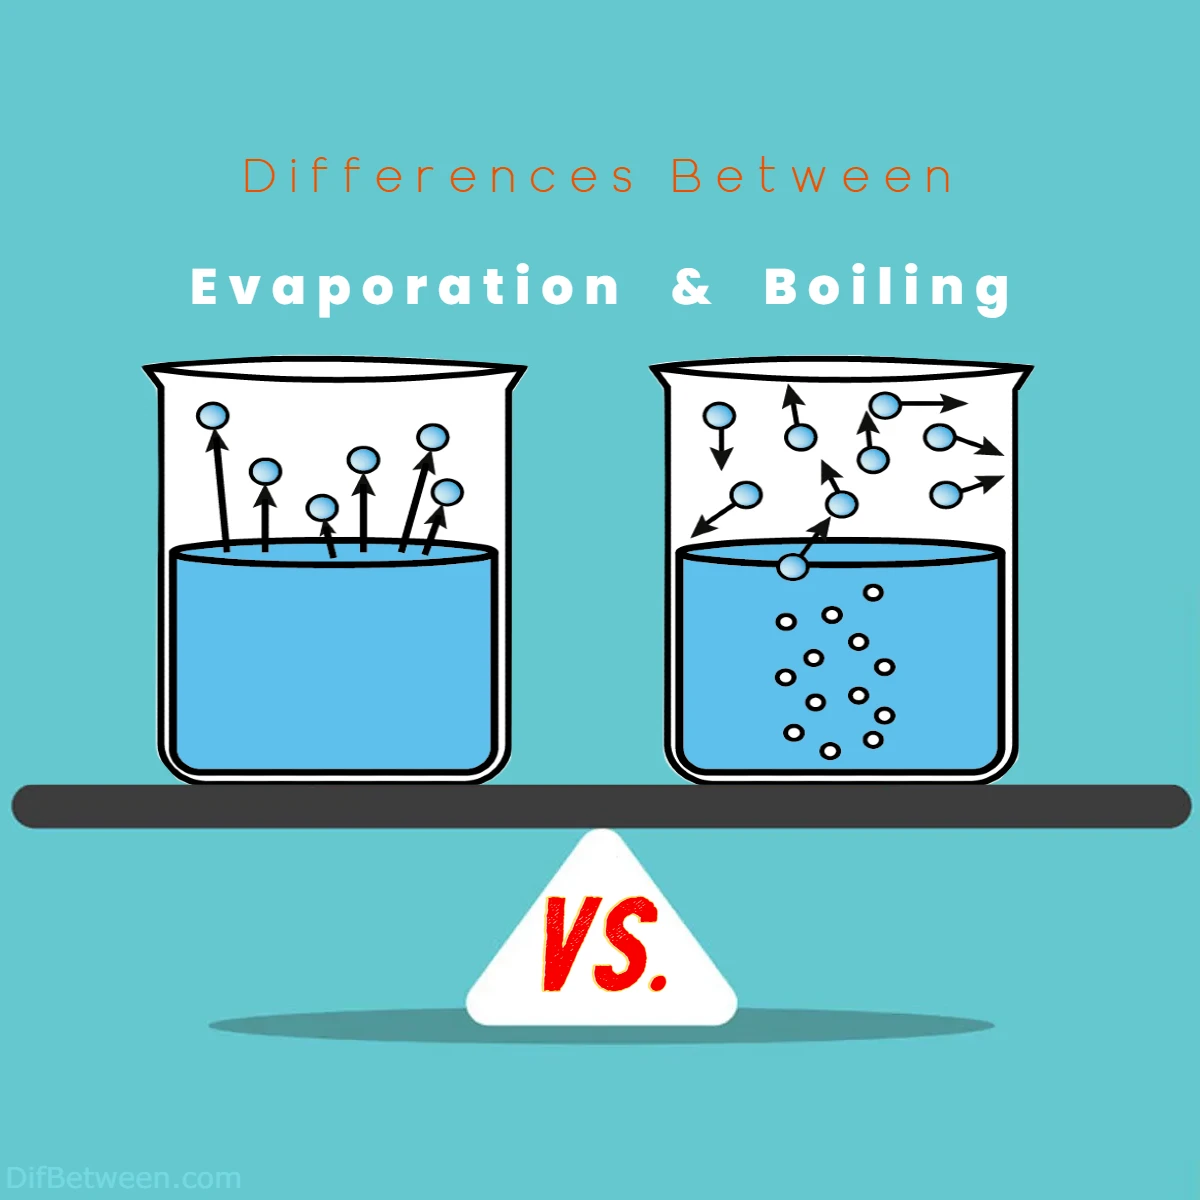 Differences Between Evaporation vs Boiling